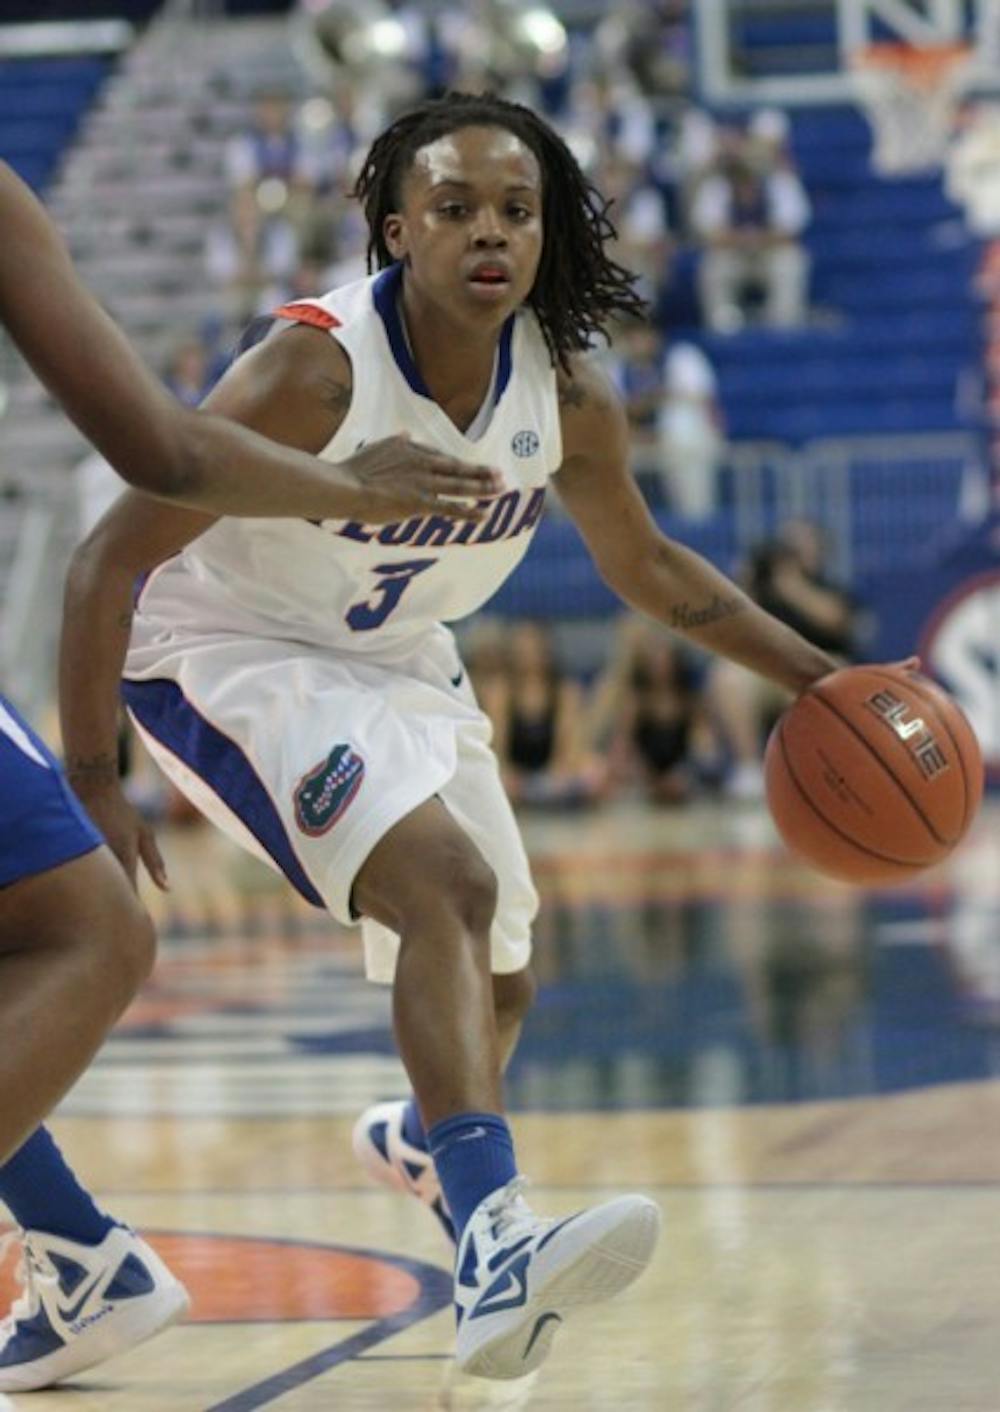 <p>Florida point guard Lanita Bartley led the Gators with 17 points and 10 rebounds in a 84-55 win against Ole Miss on Sunday.</p>